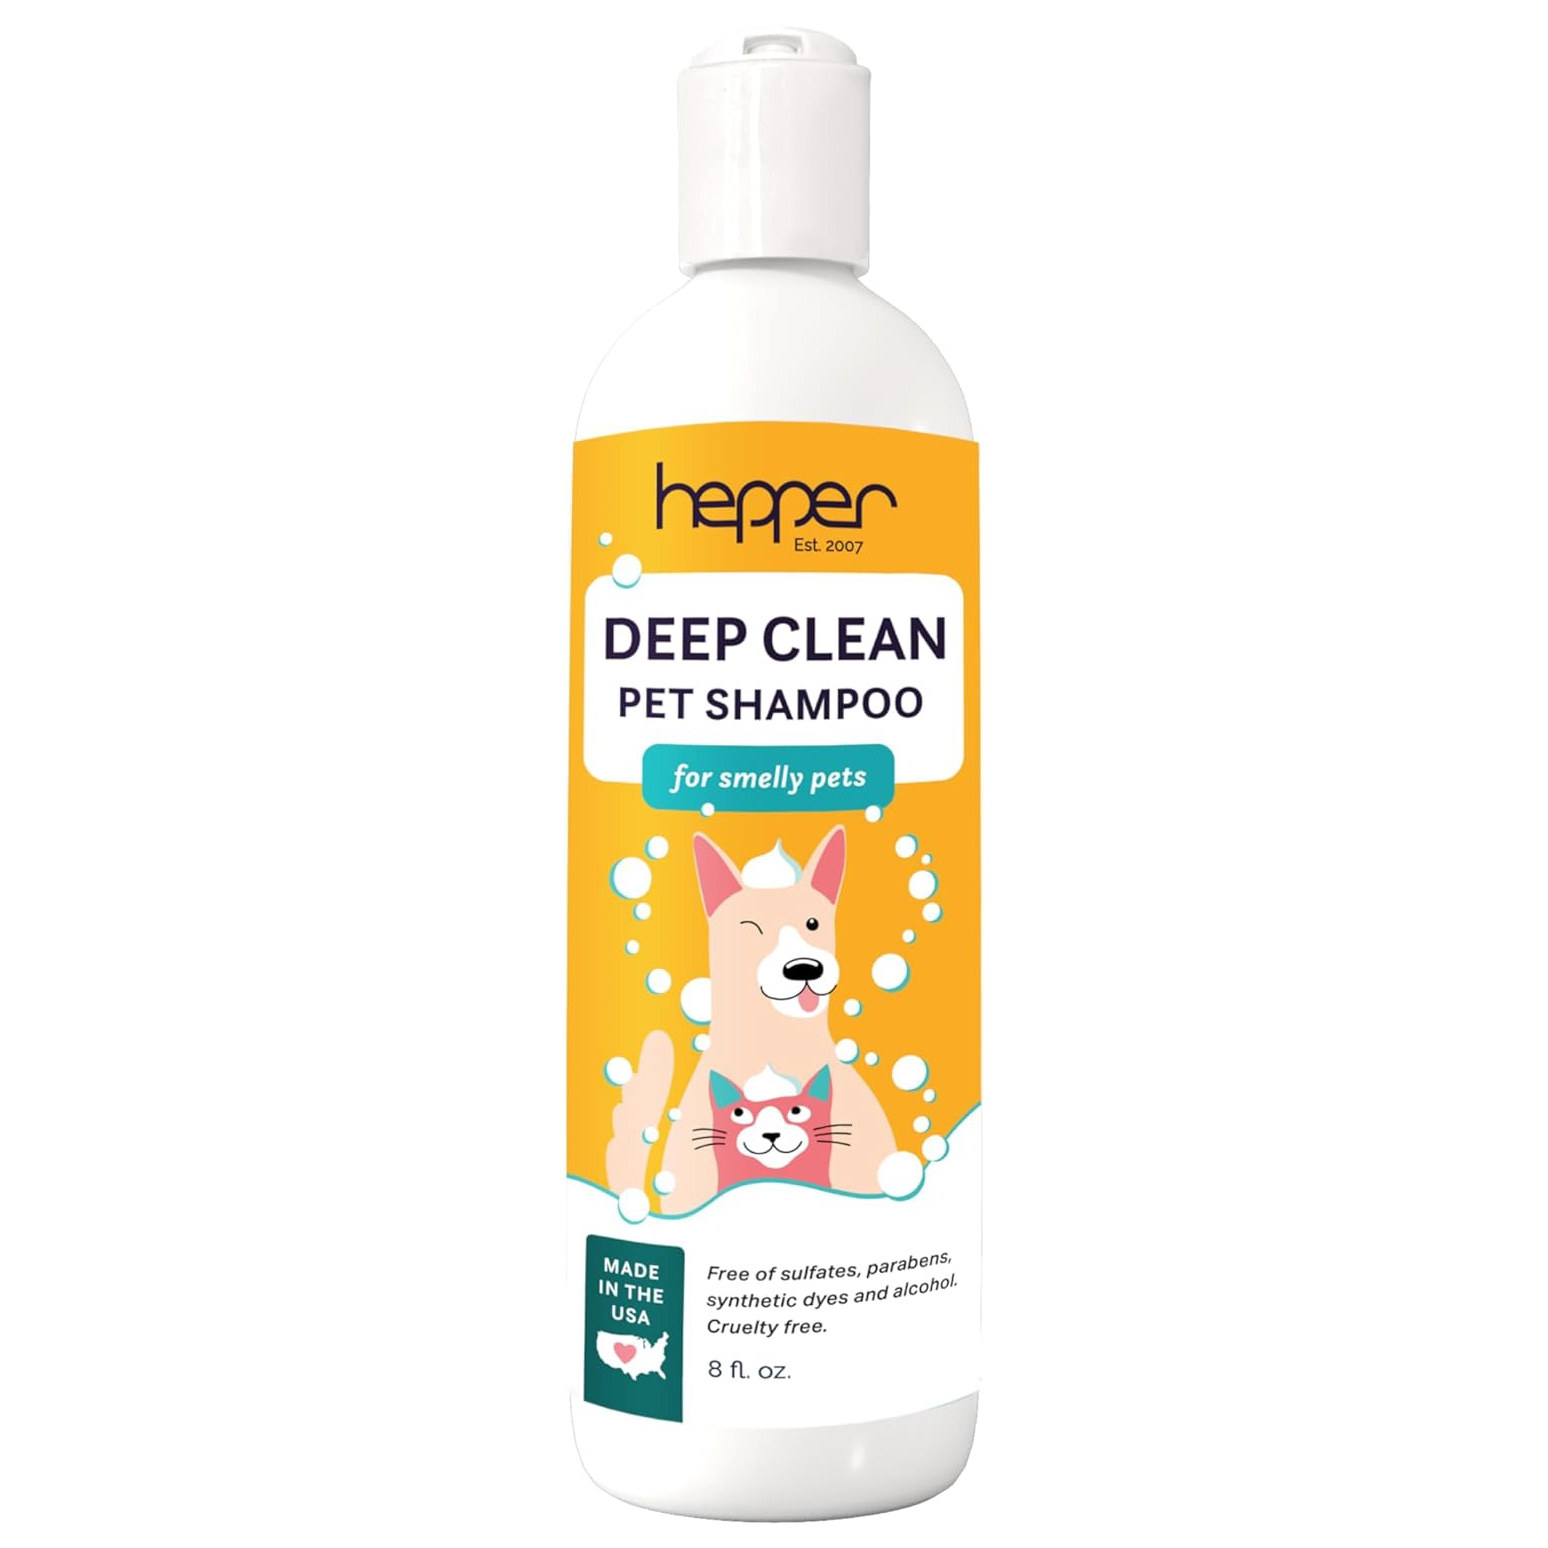 Hepper Deep Clean Pet Shampoo for Smelly Pets